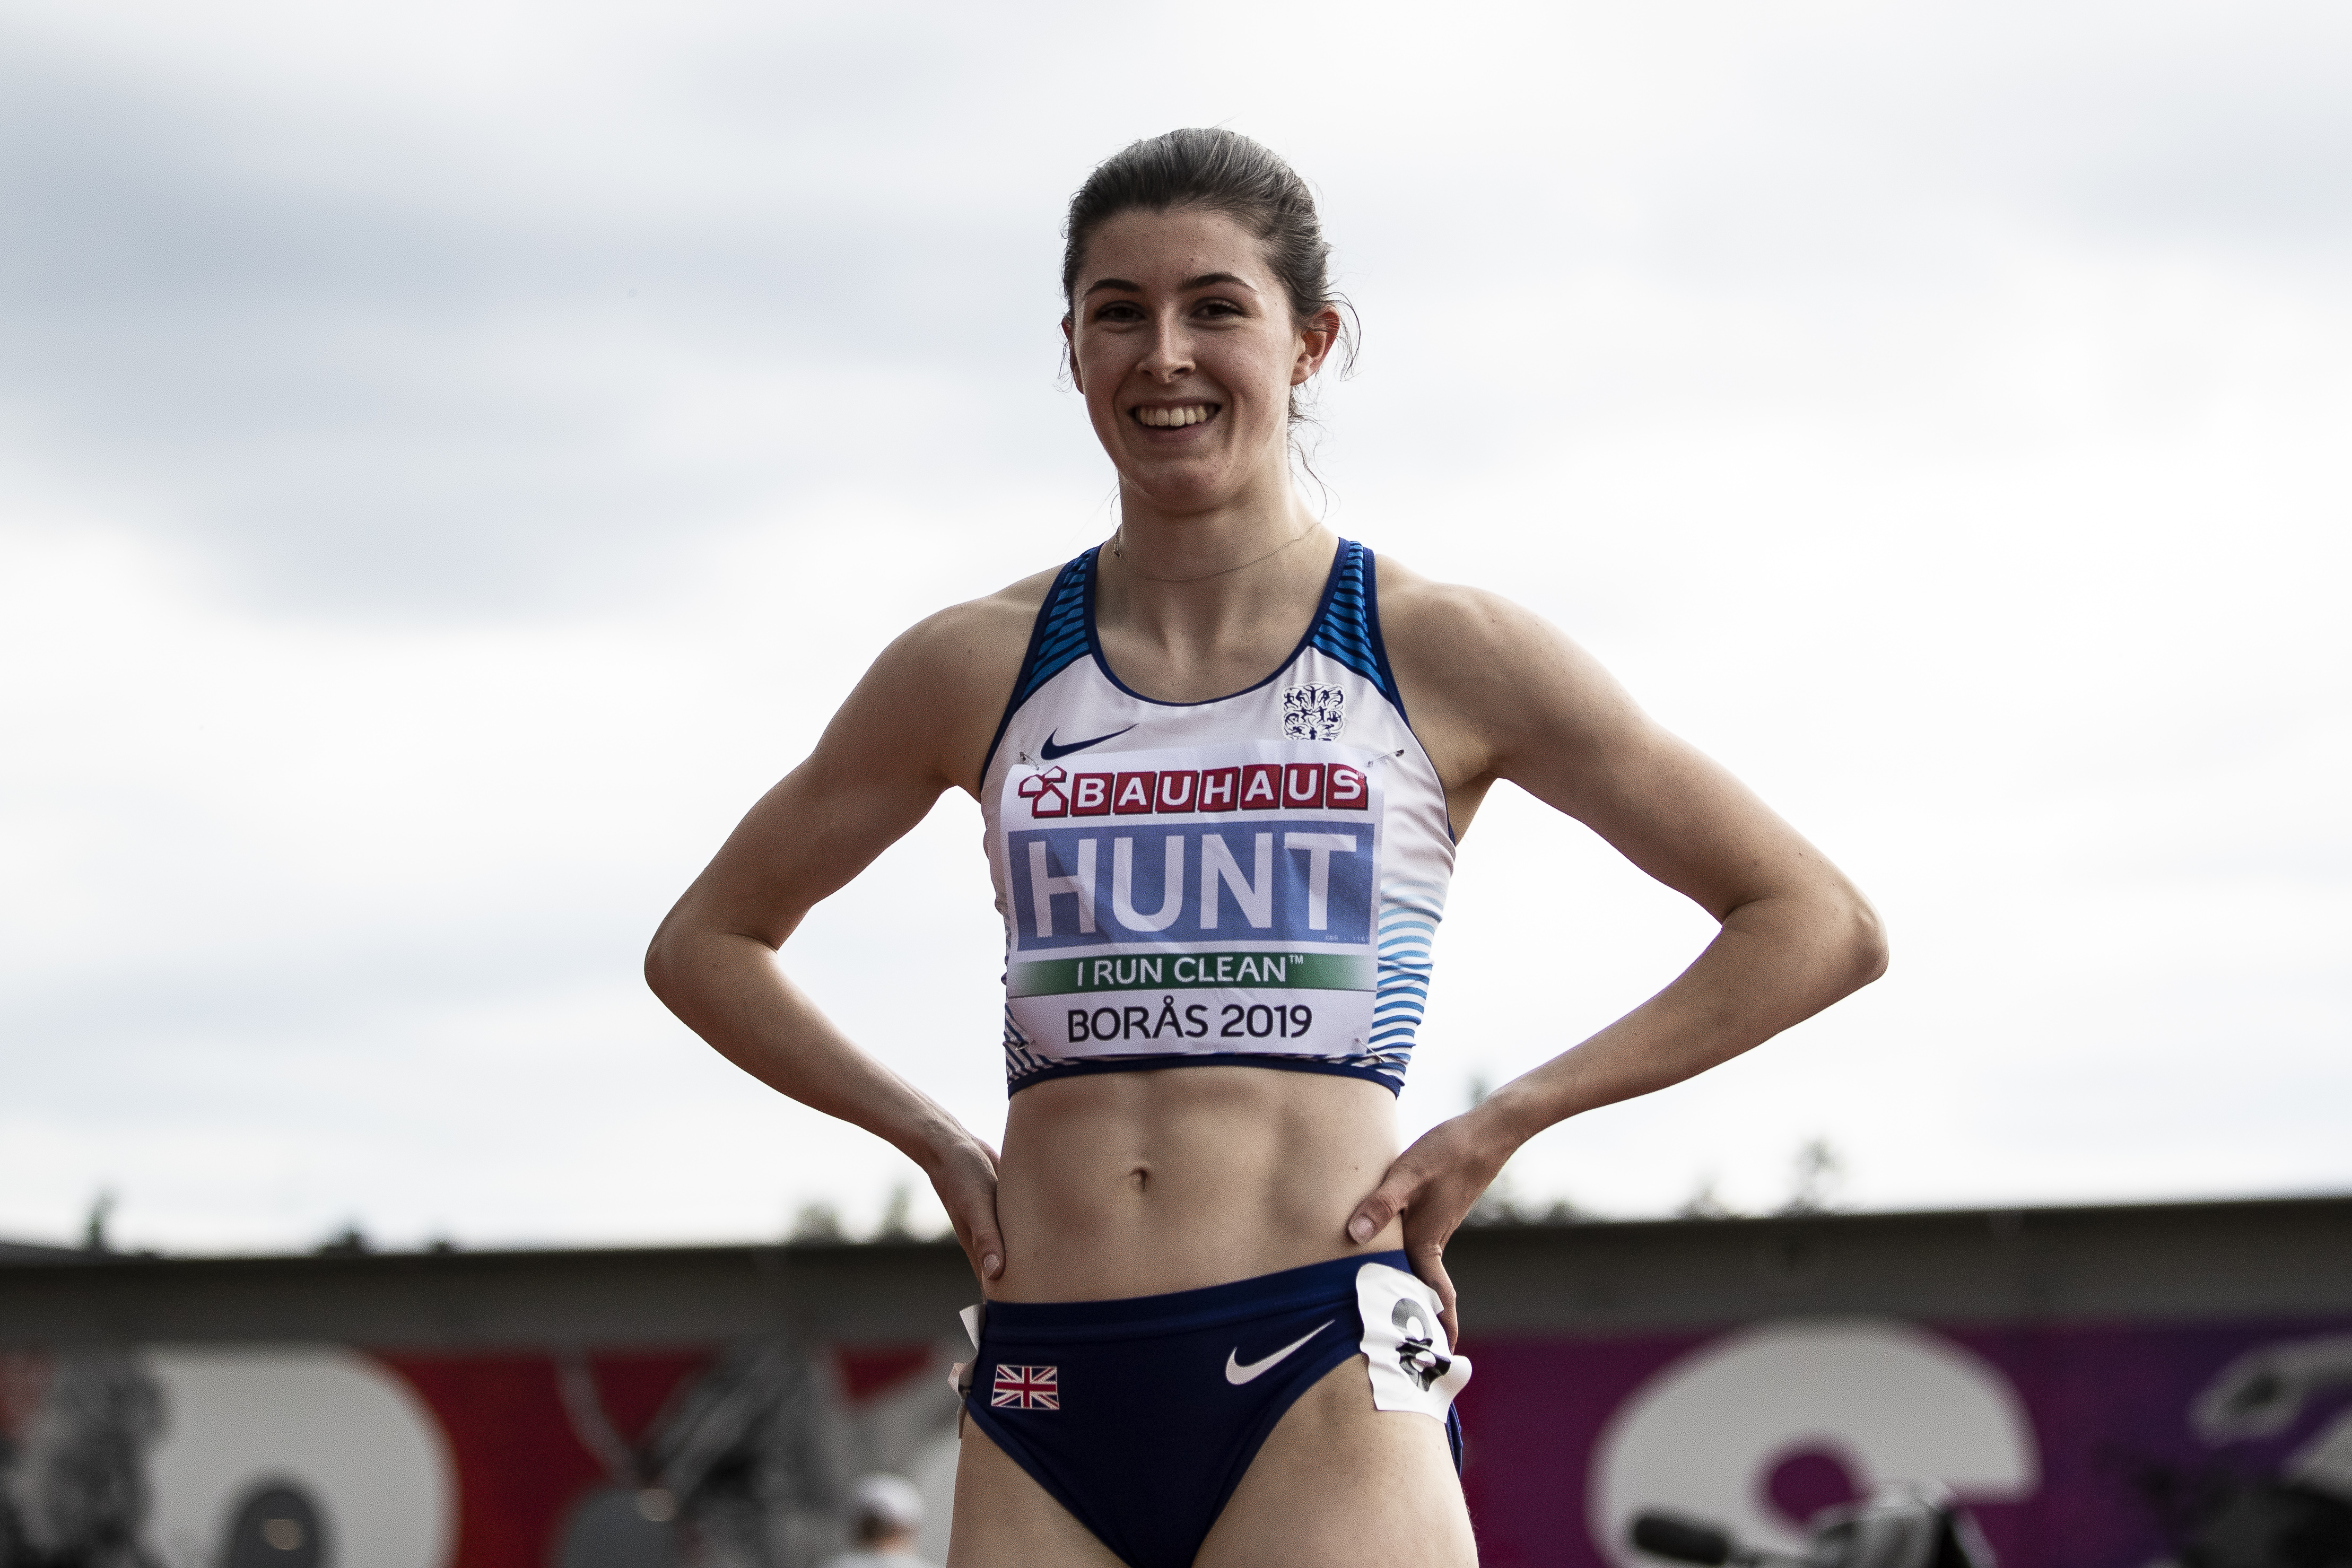 HUNT LEADS THE CHARGE AS MORE BRITS MAKE FINALS AT EURO U20 CHAMPIONSHIPS